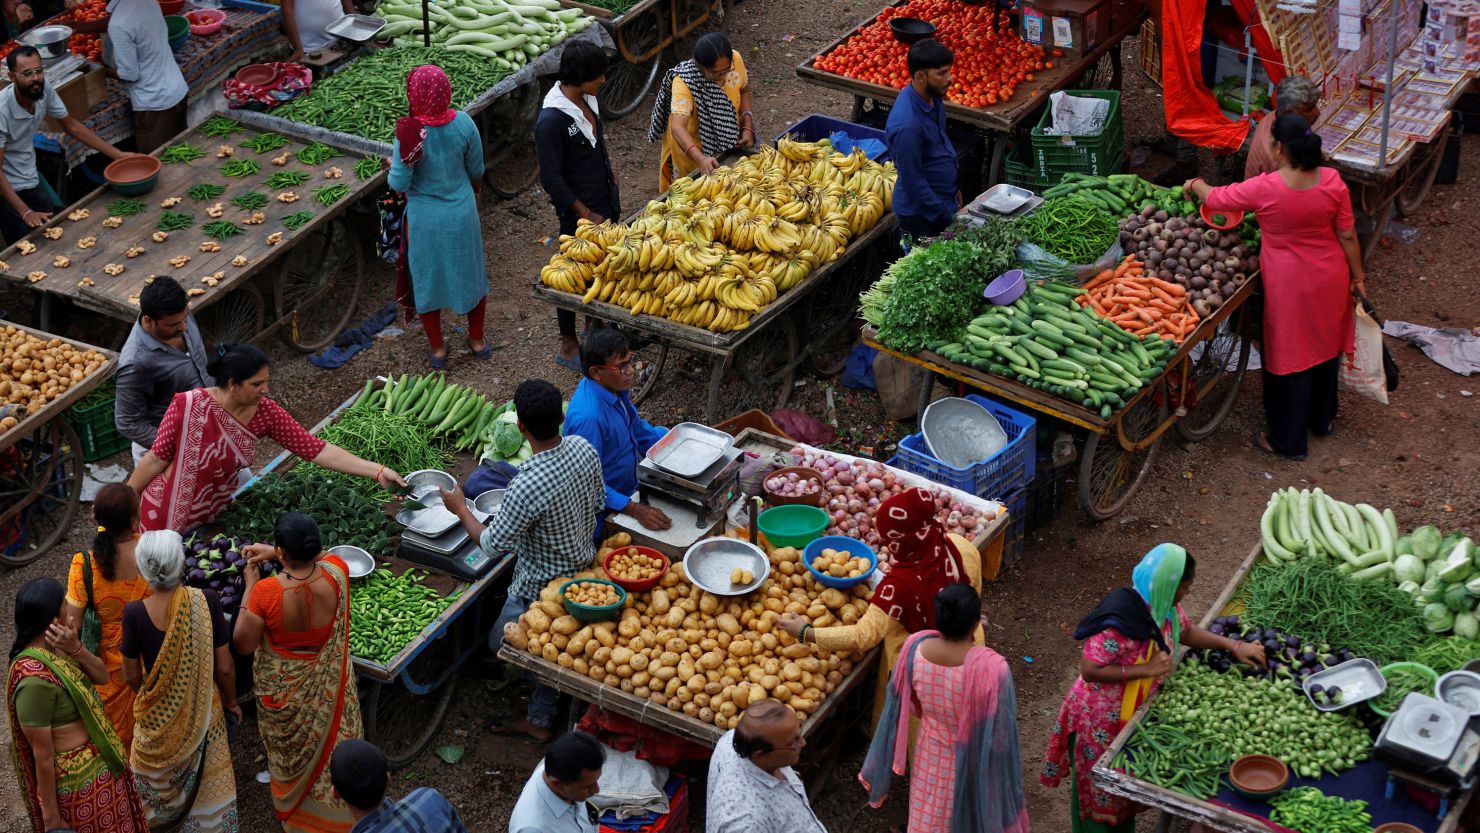 India's economy is growing fast but analysts say a dry monsoon season and rising food prices could slow activity later this year.